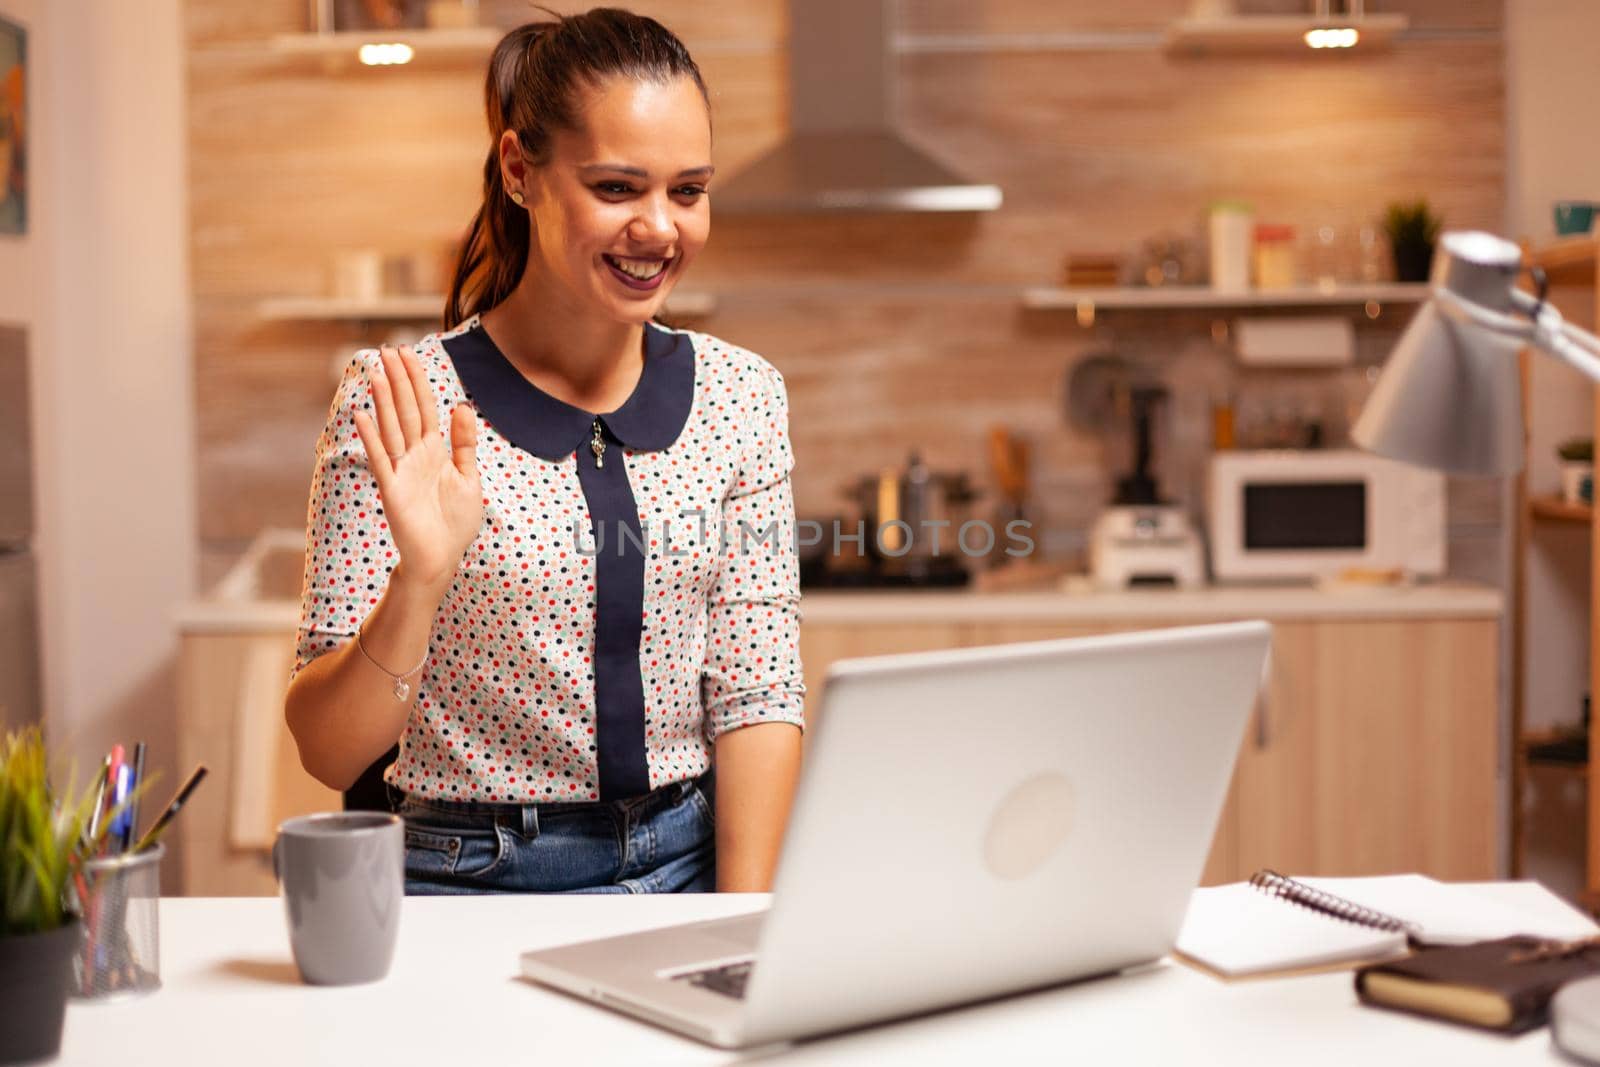 Cheerful woman waving during a video call while working late at night from home kitchen. Employee using modern technology at midnight doing overtime for job, business, career, network, lifestyle.